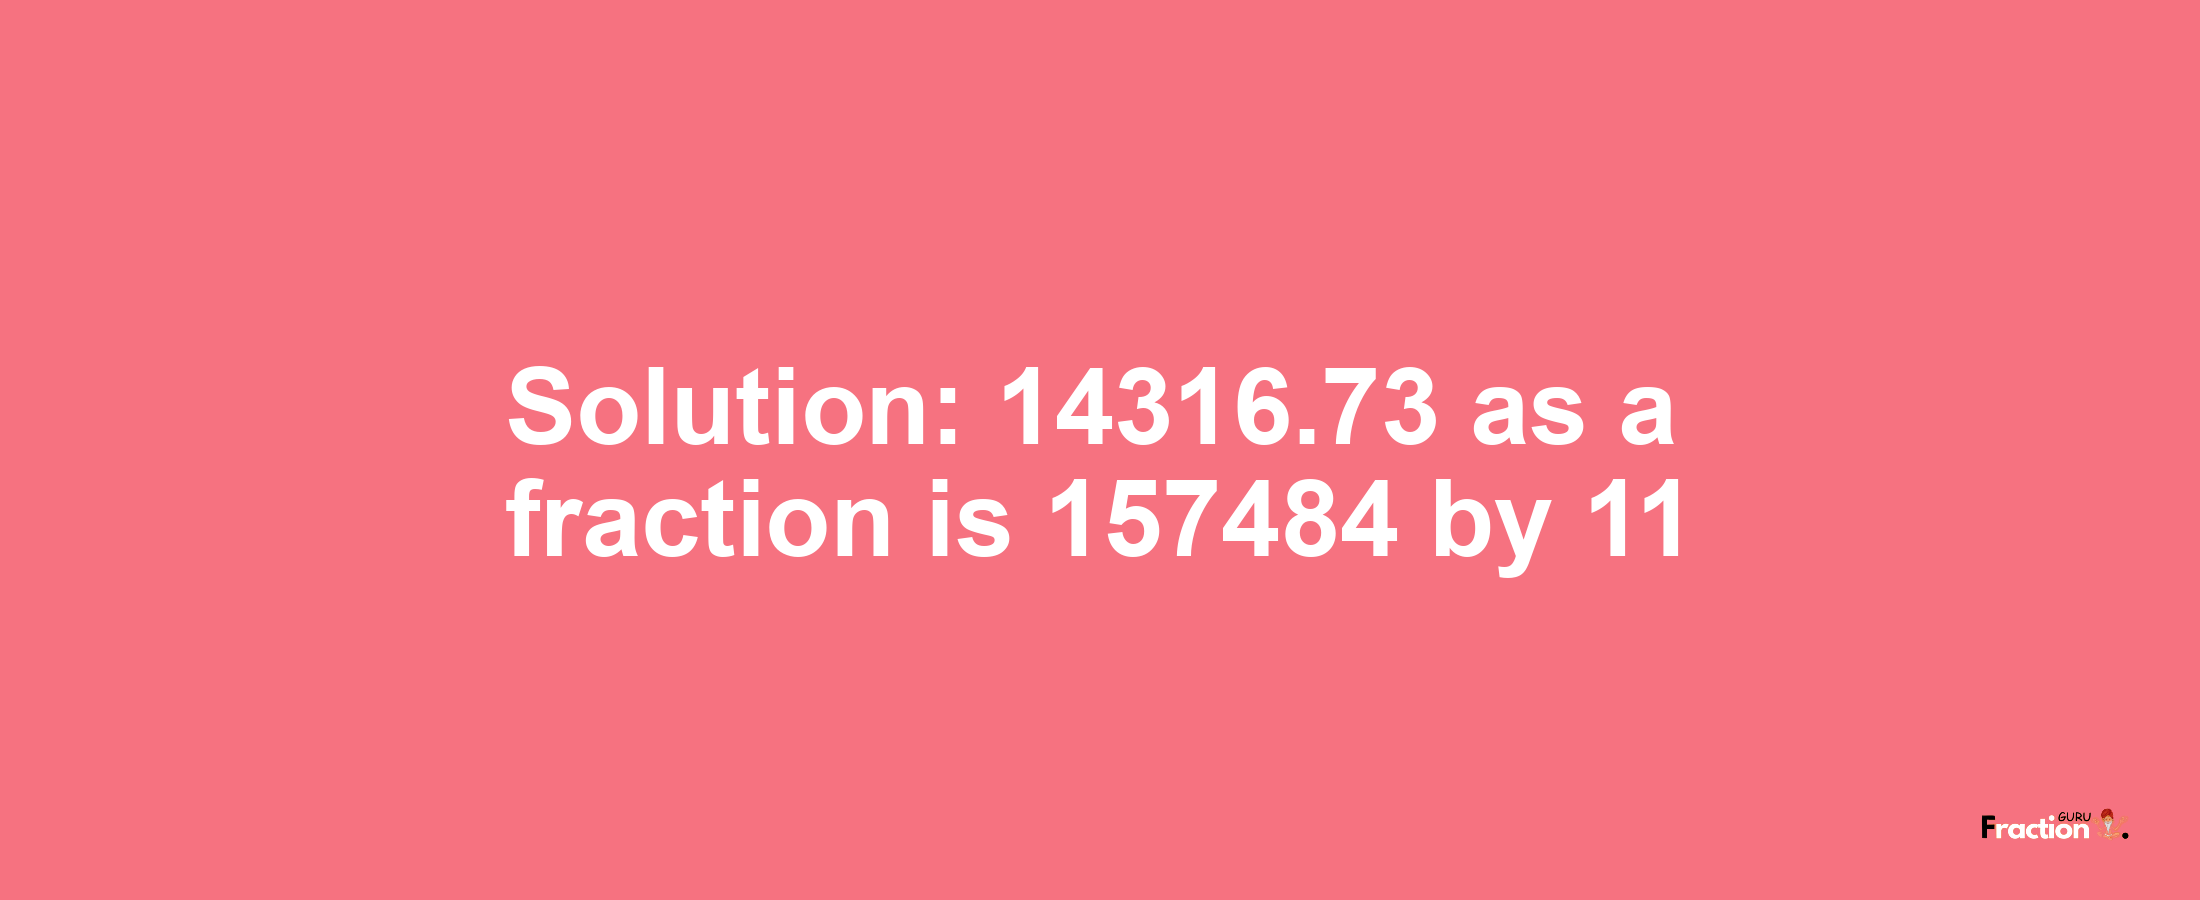 Solution:14316.73 as a fraction is 157484/11